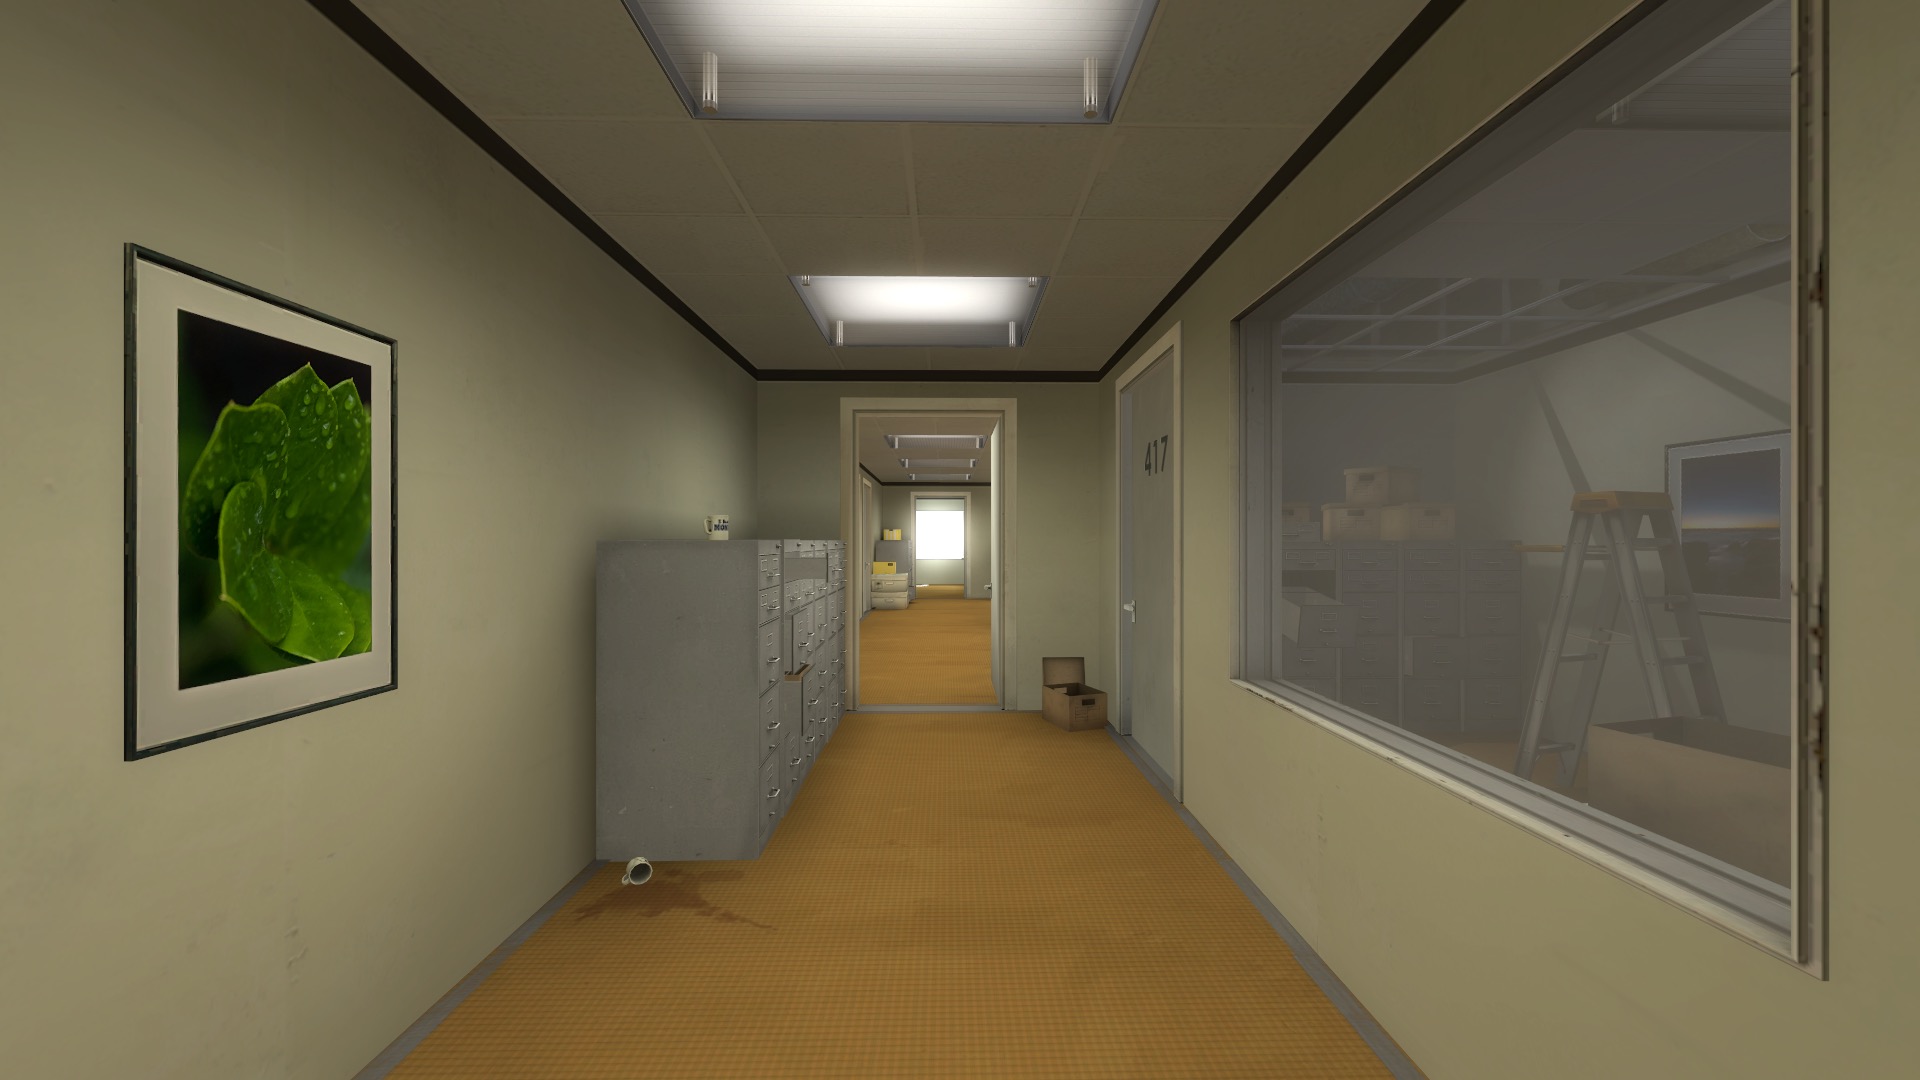 A screenshot of The Stanley Parable, showing a boring-looking office